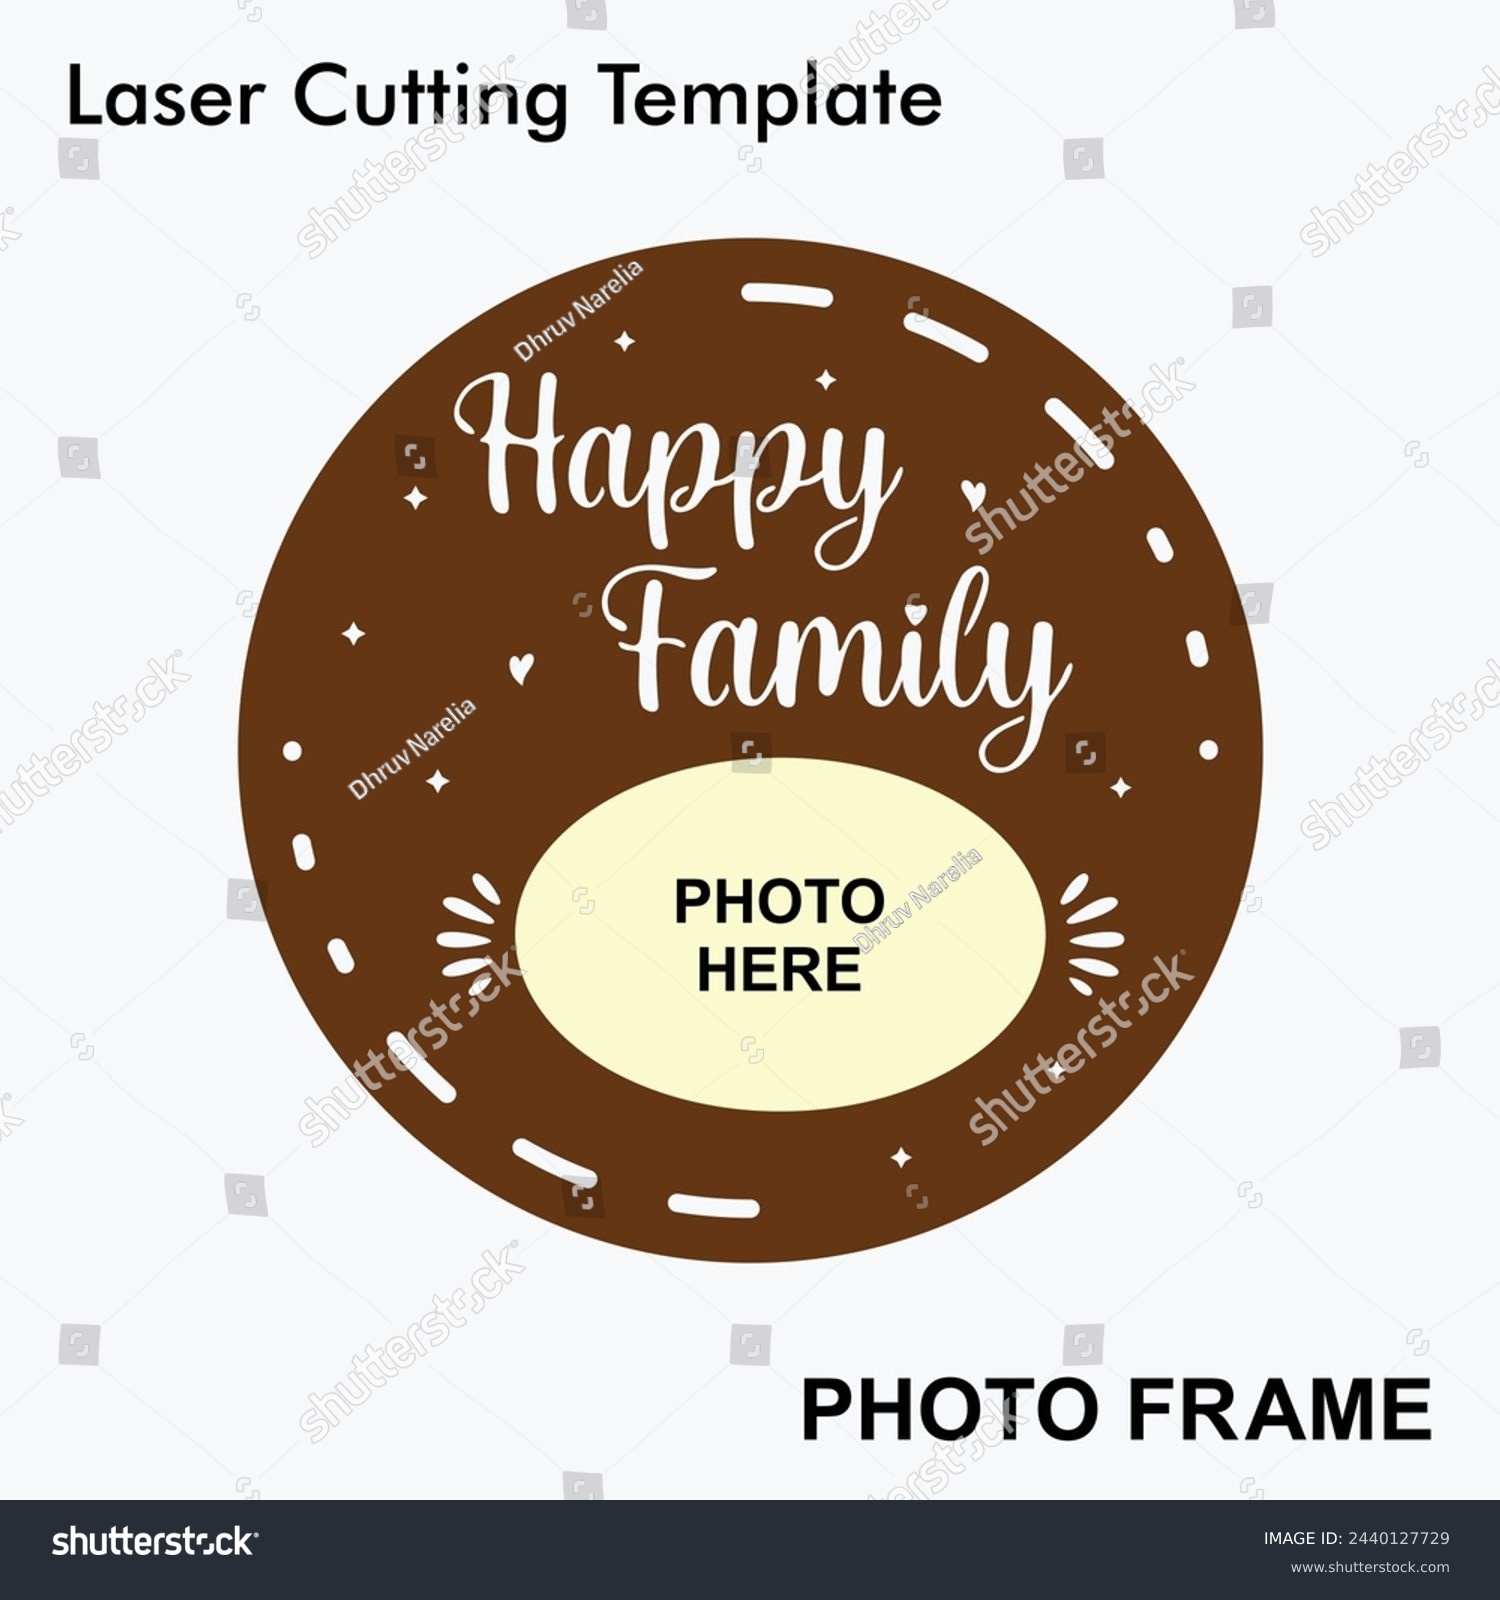 SVG of Happy Family laser cut photo frame with 1 photo. Home decor wooden sublimation frame template. Suitable for home and room decoration. Laser cut photo frame template design for mdf and acrylic cutting. svg